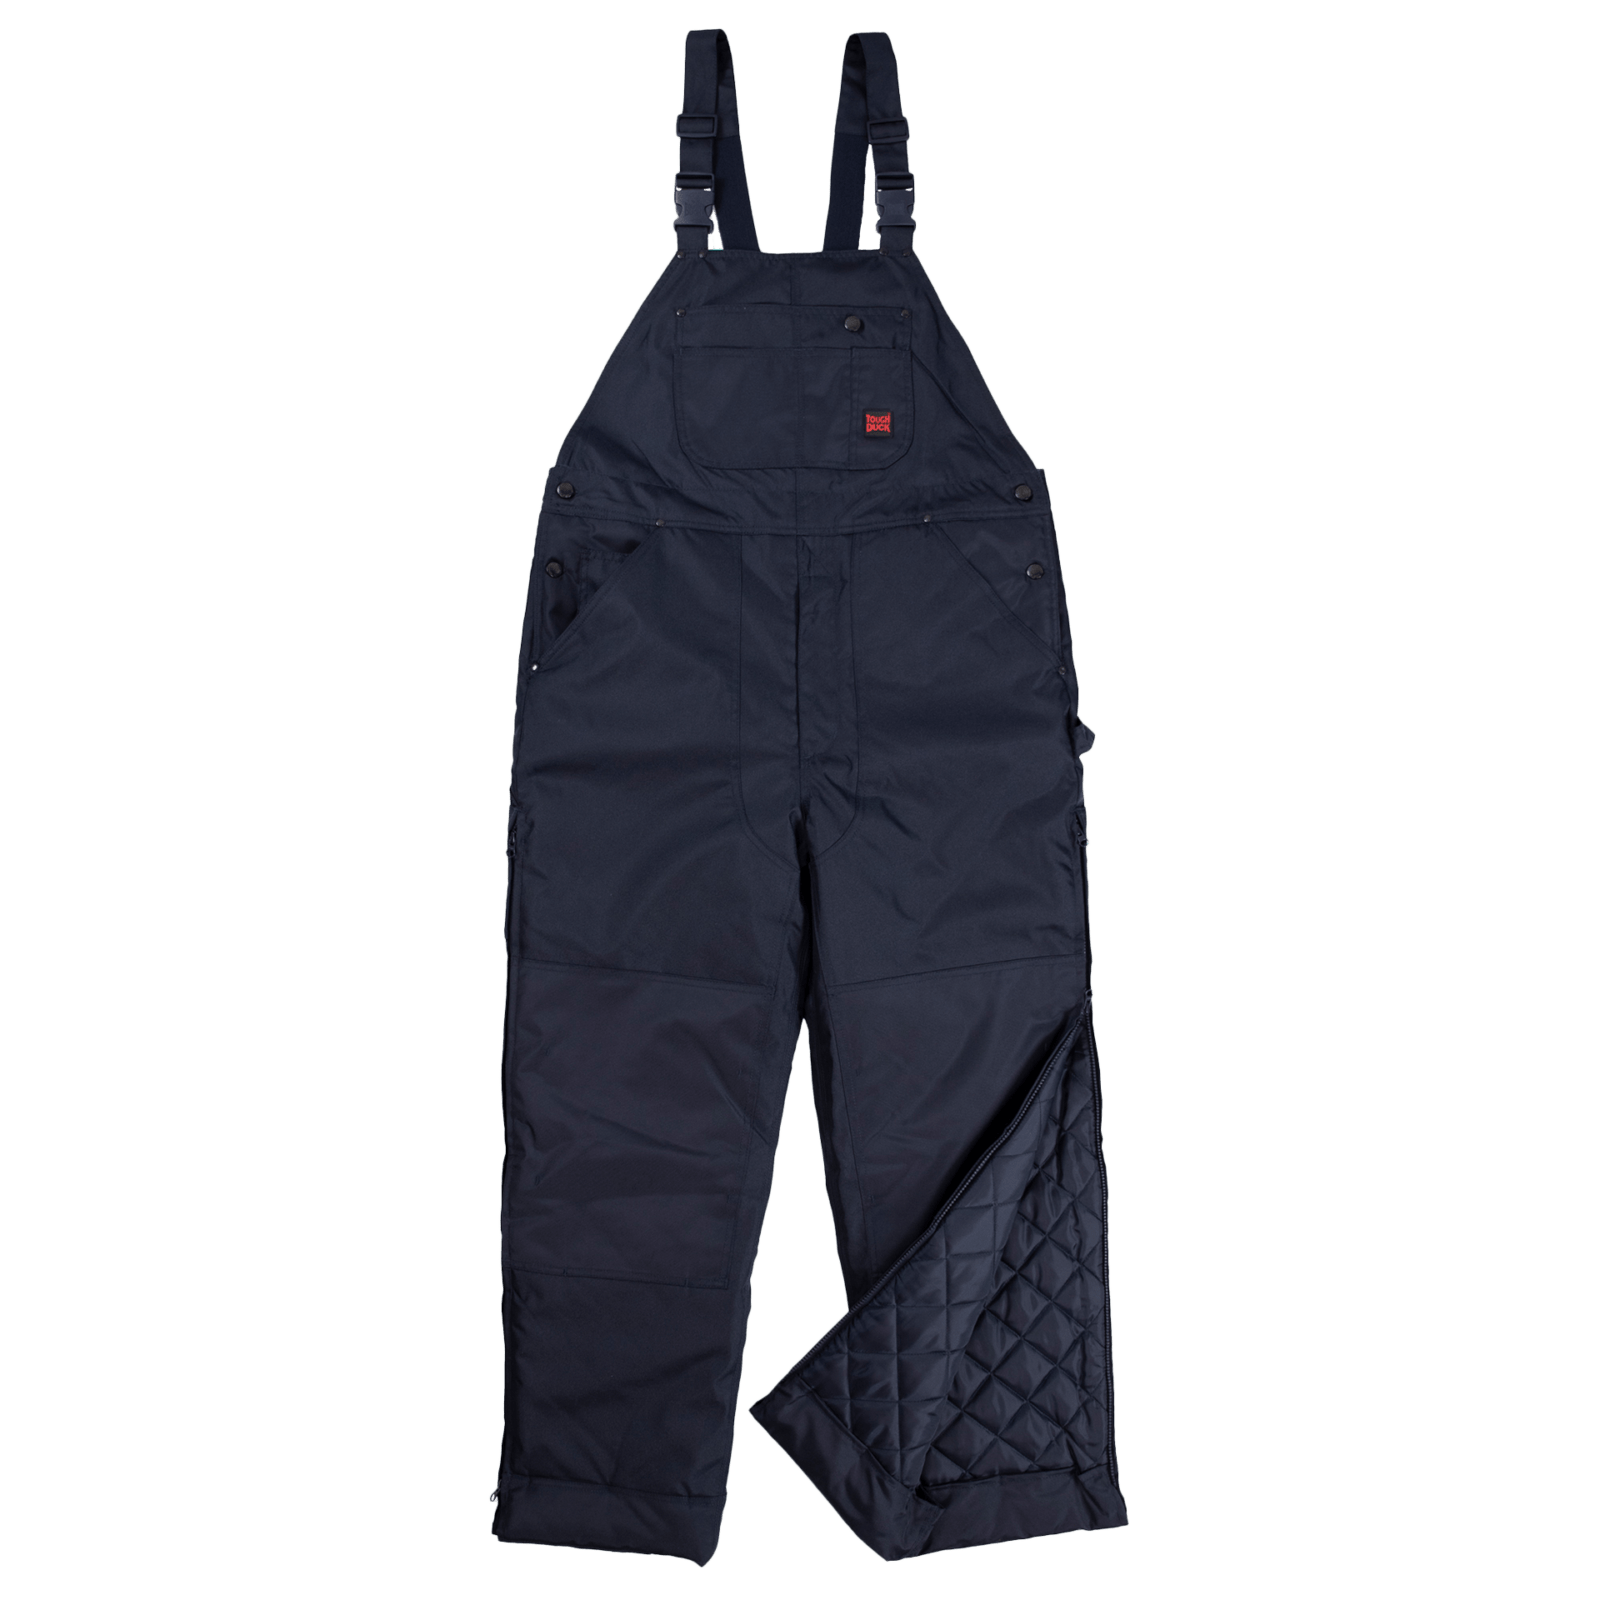 Poly Oxford Insulated Bib Overalls